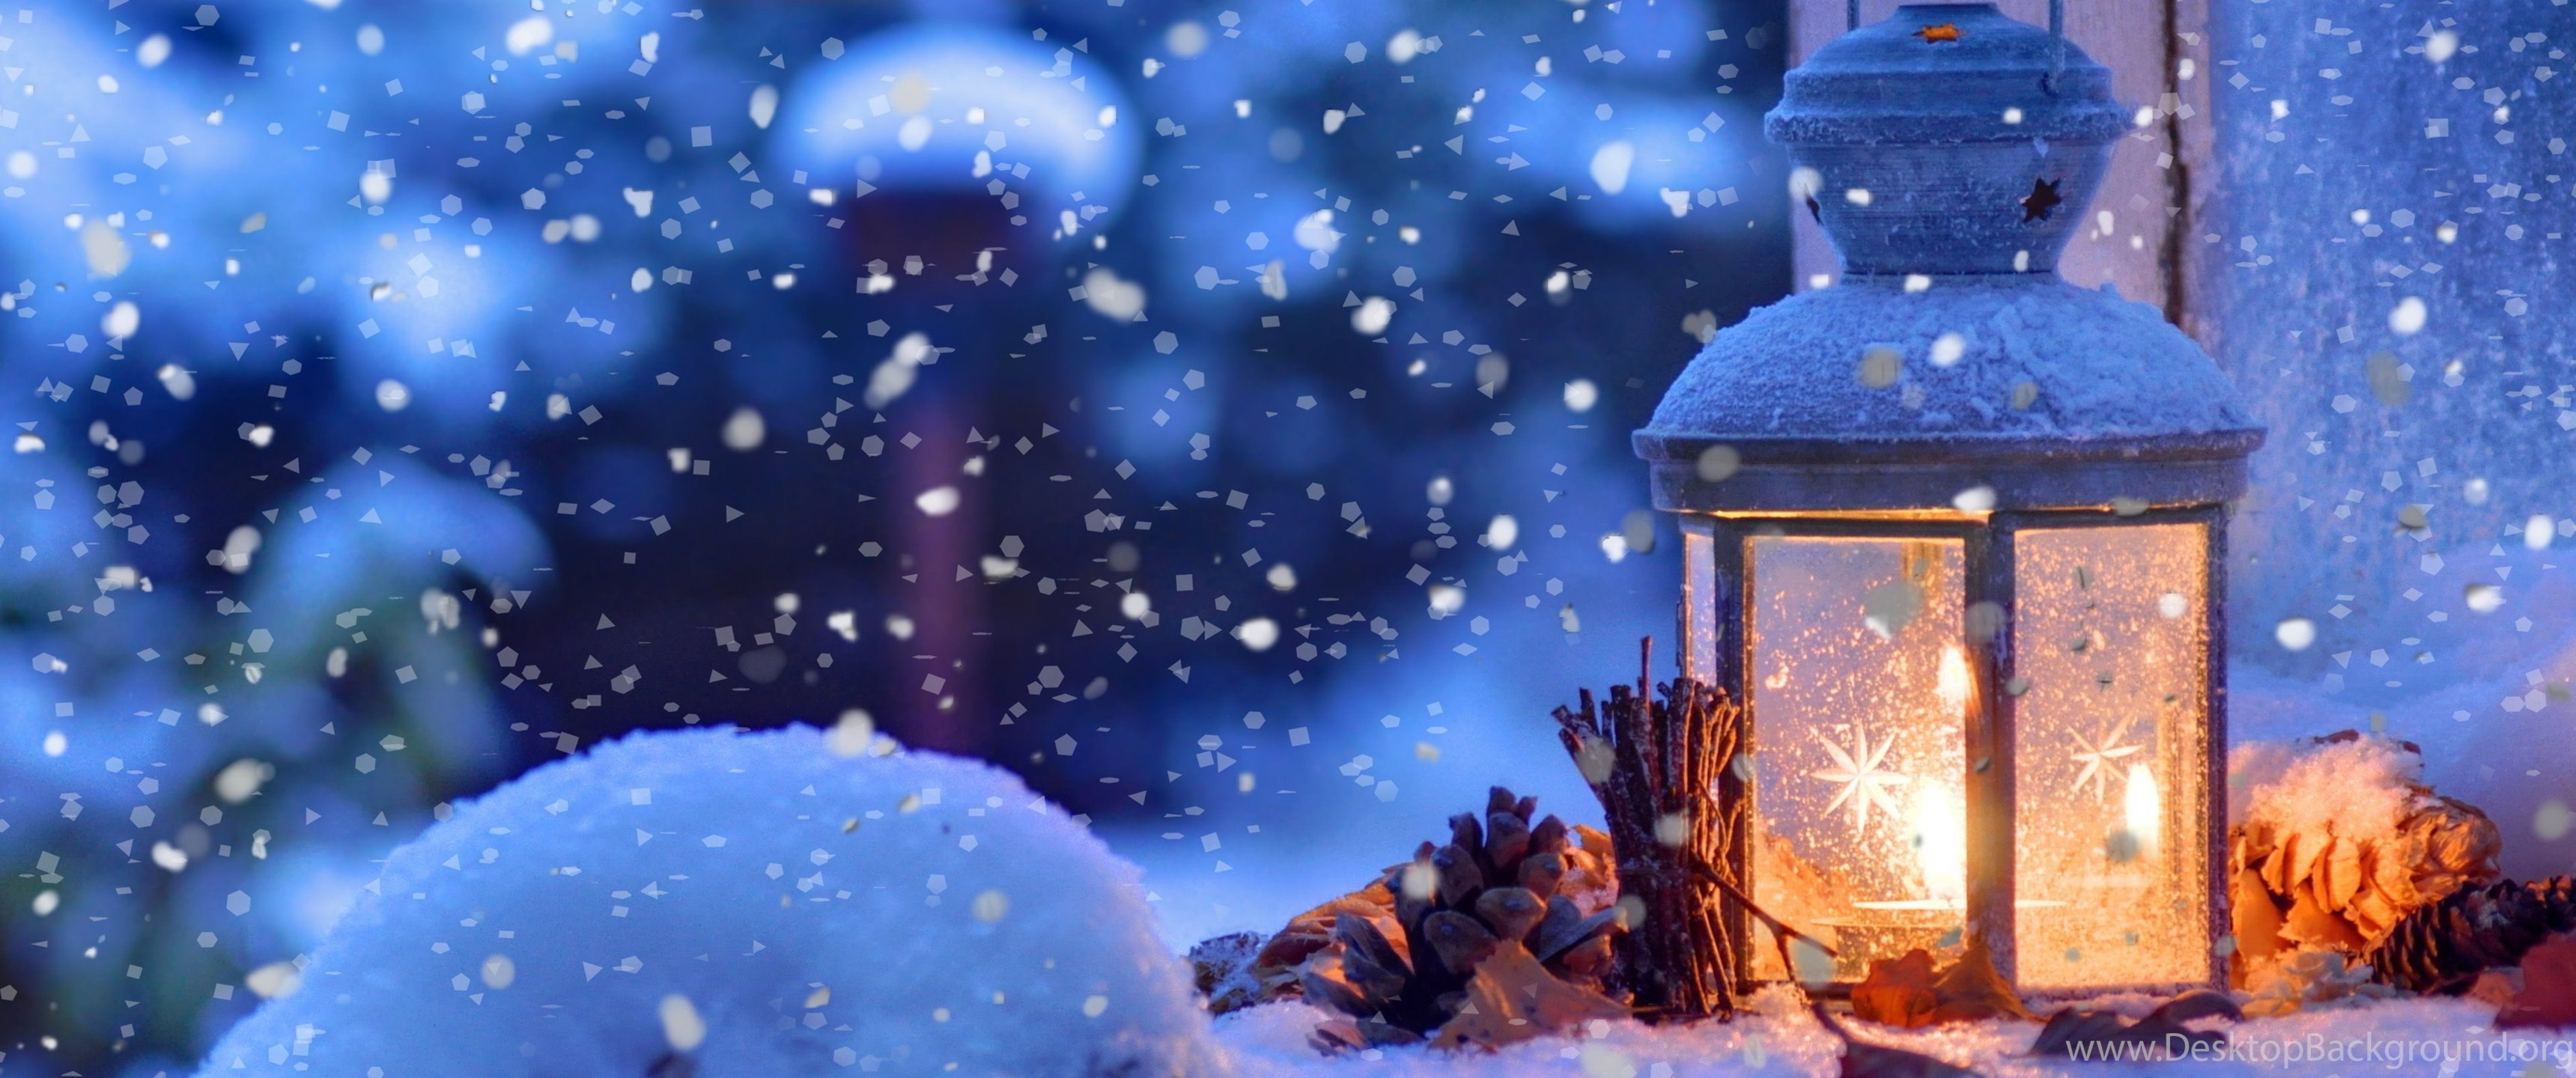 Warm Candle In A Cold Winter Night HD Wallpaper Desktop Background